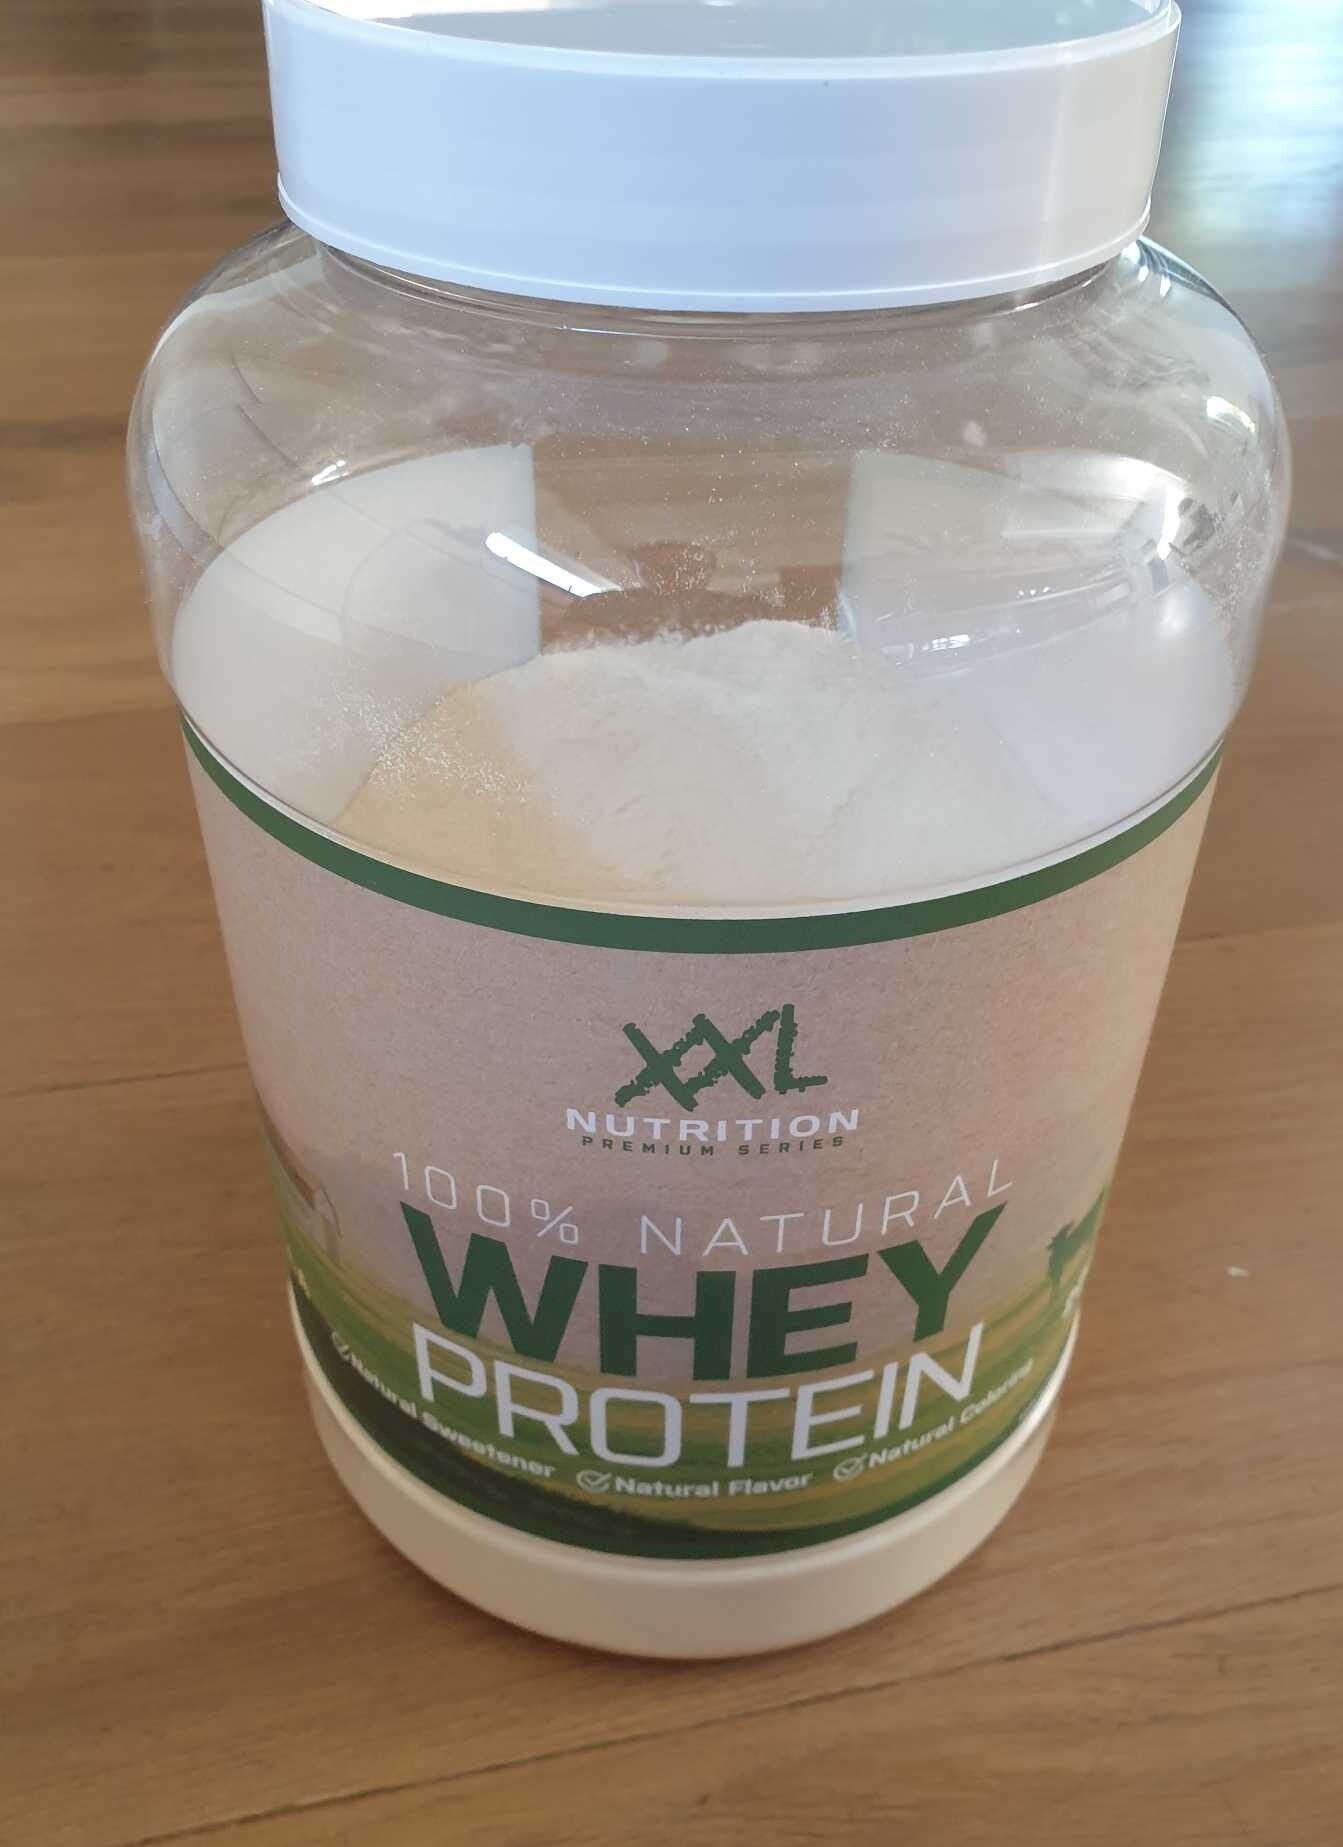 100% Natural Whey Protein - Product